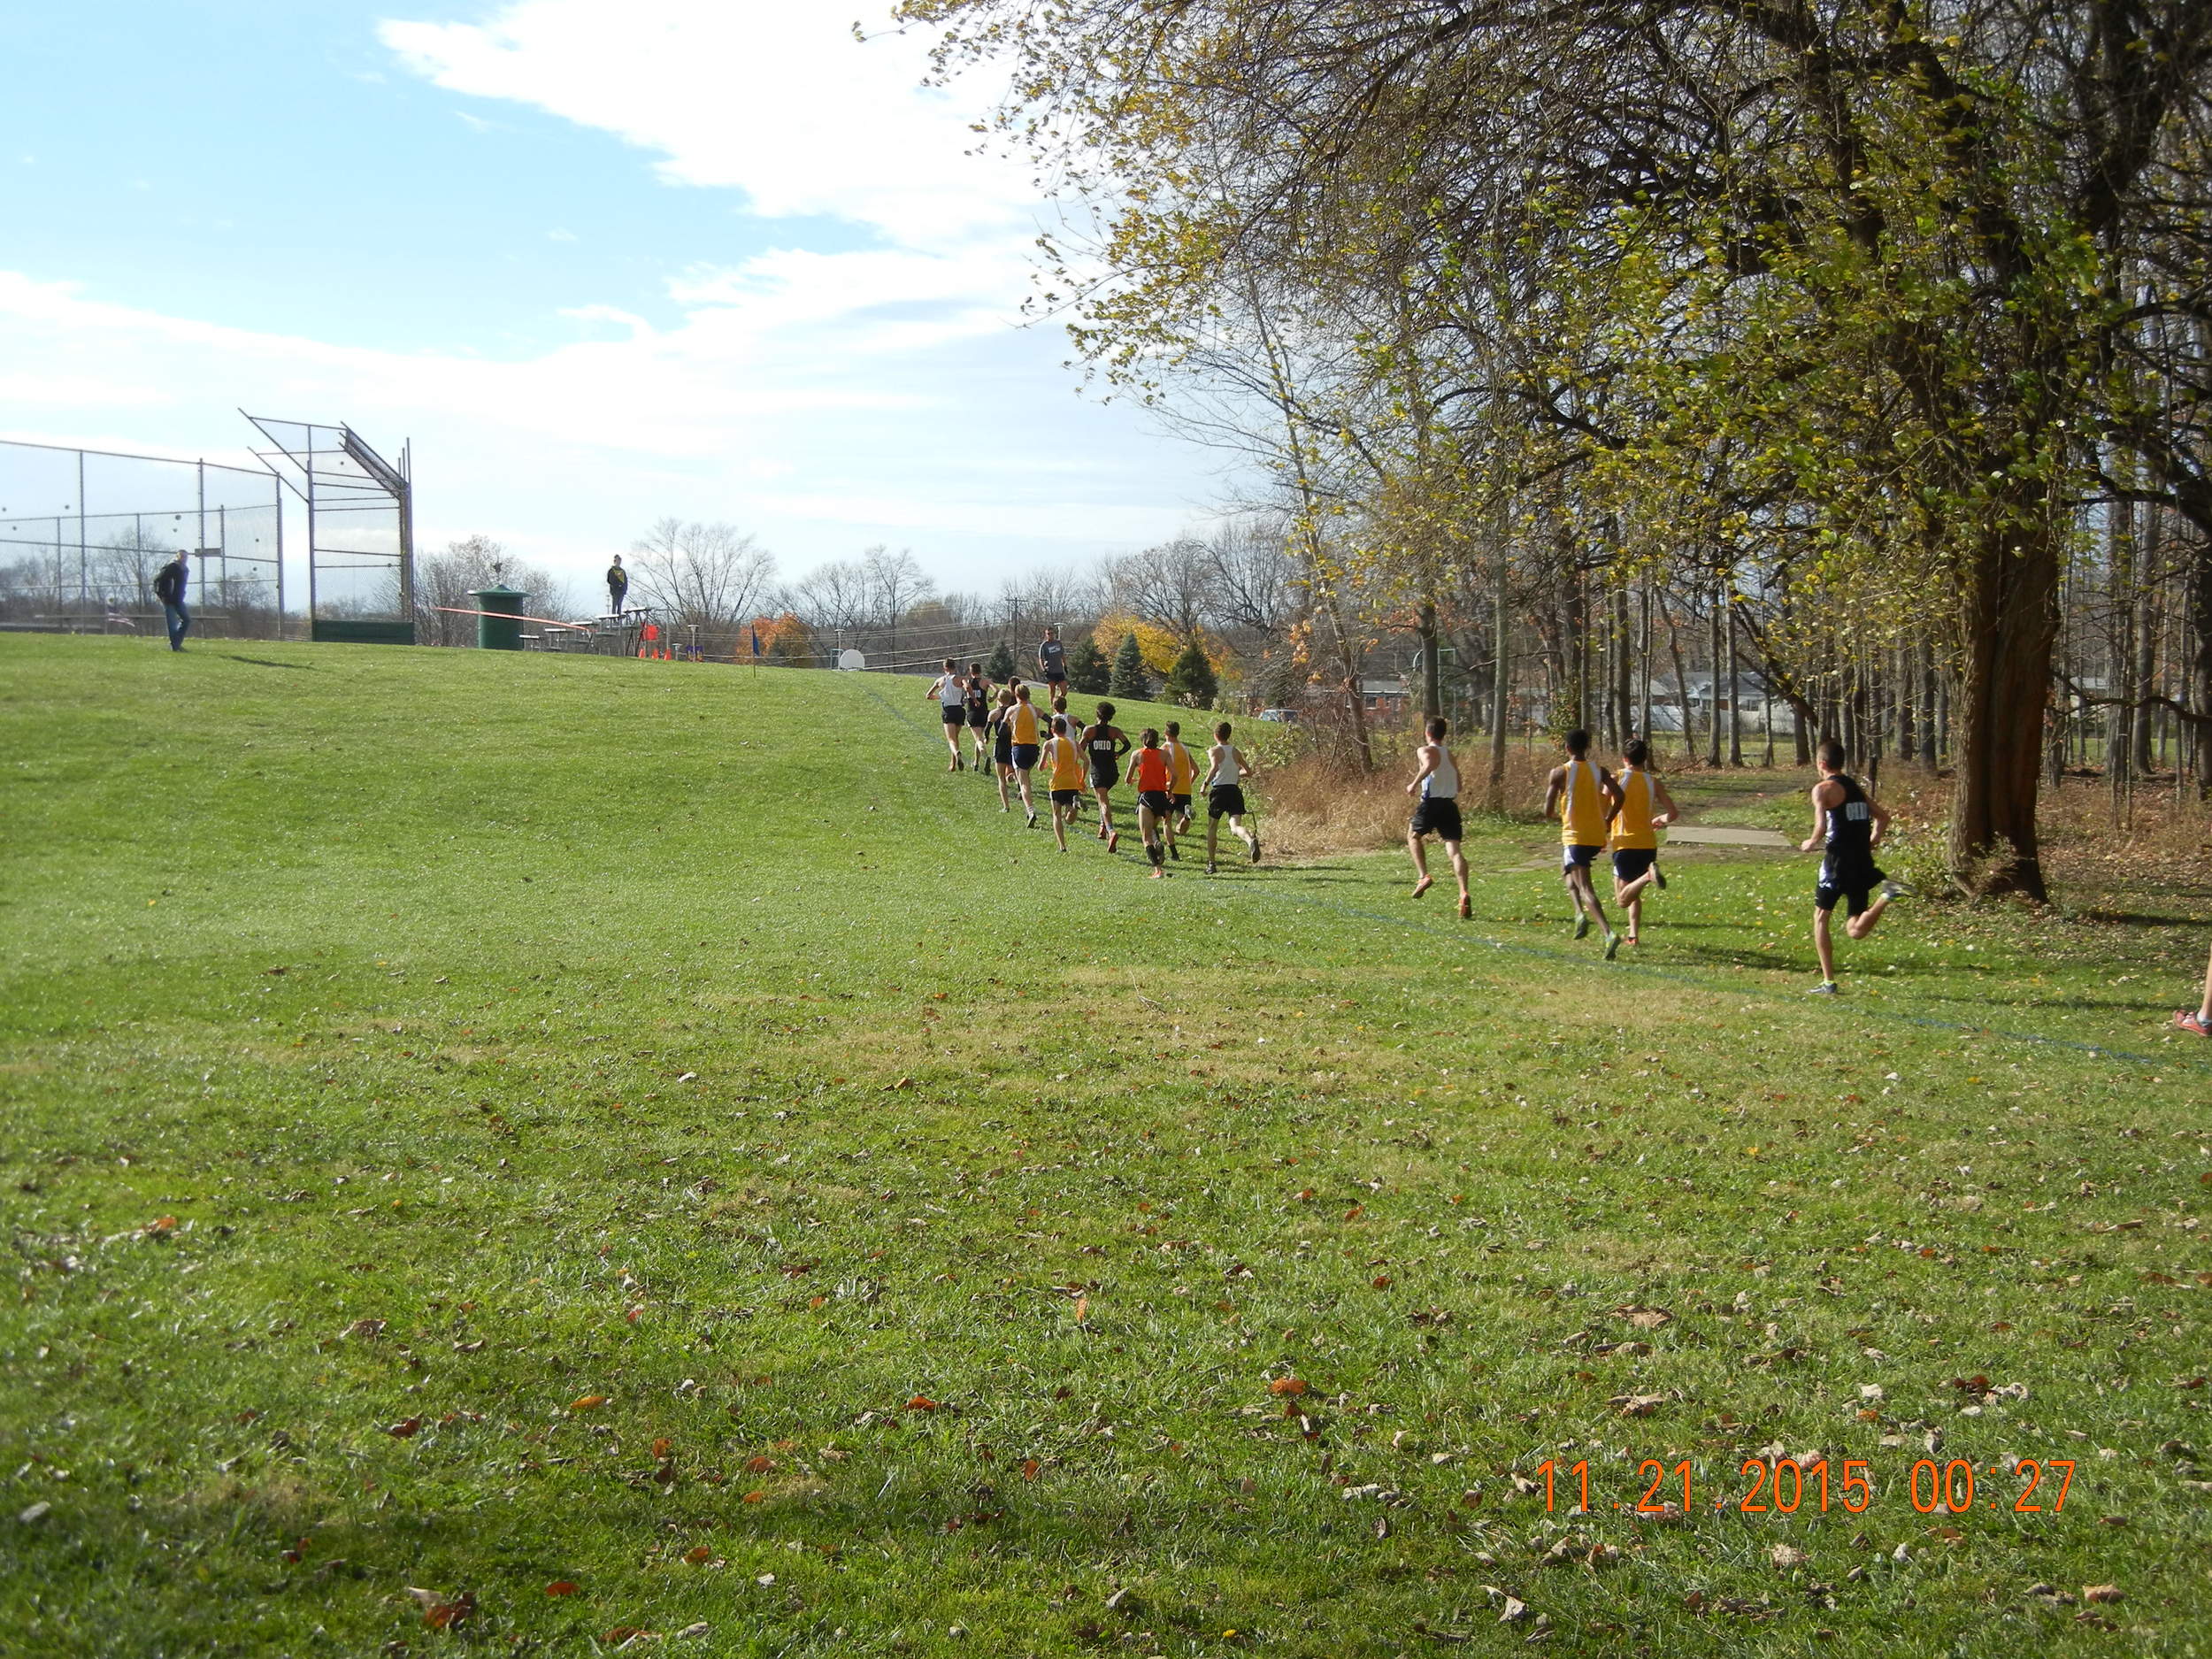 Leaders approaching the 2-mile mark